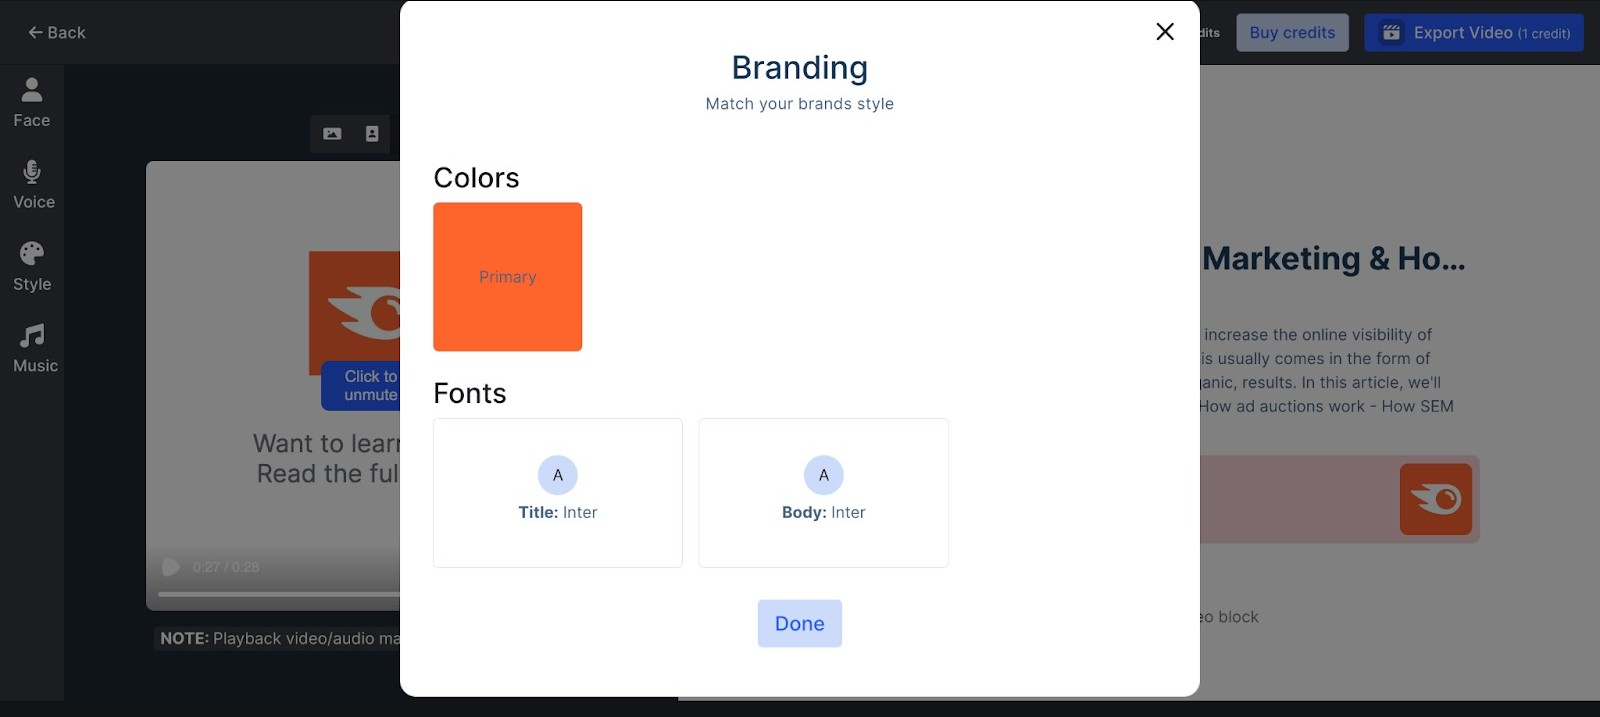 Options to set a primary brand color, a title font, and a body font.